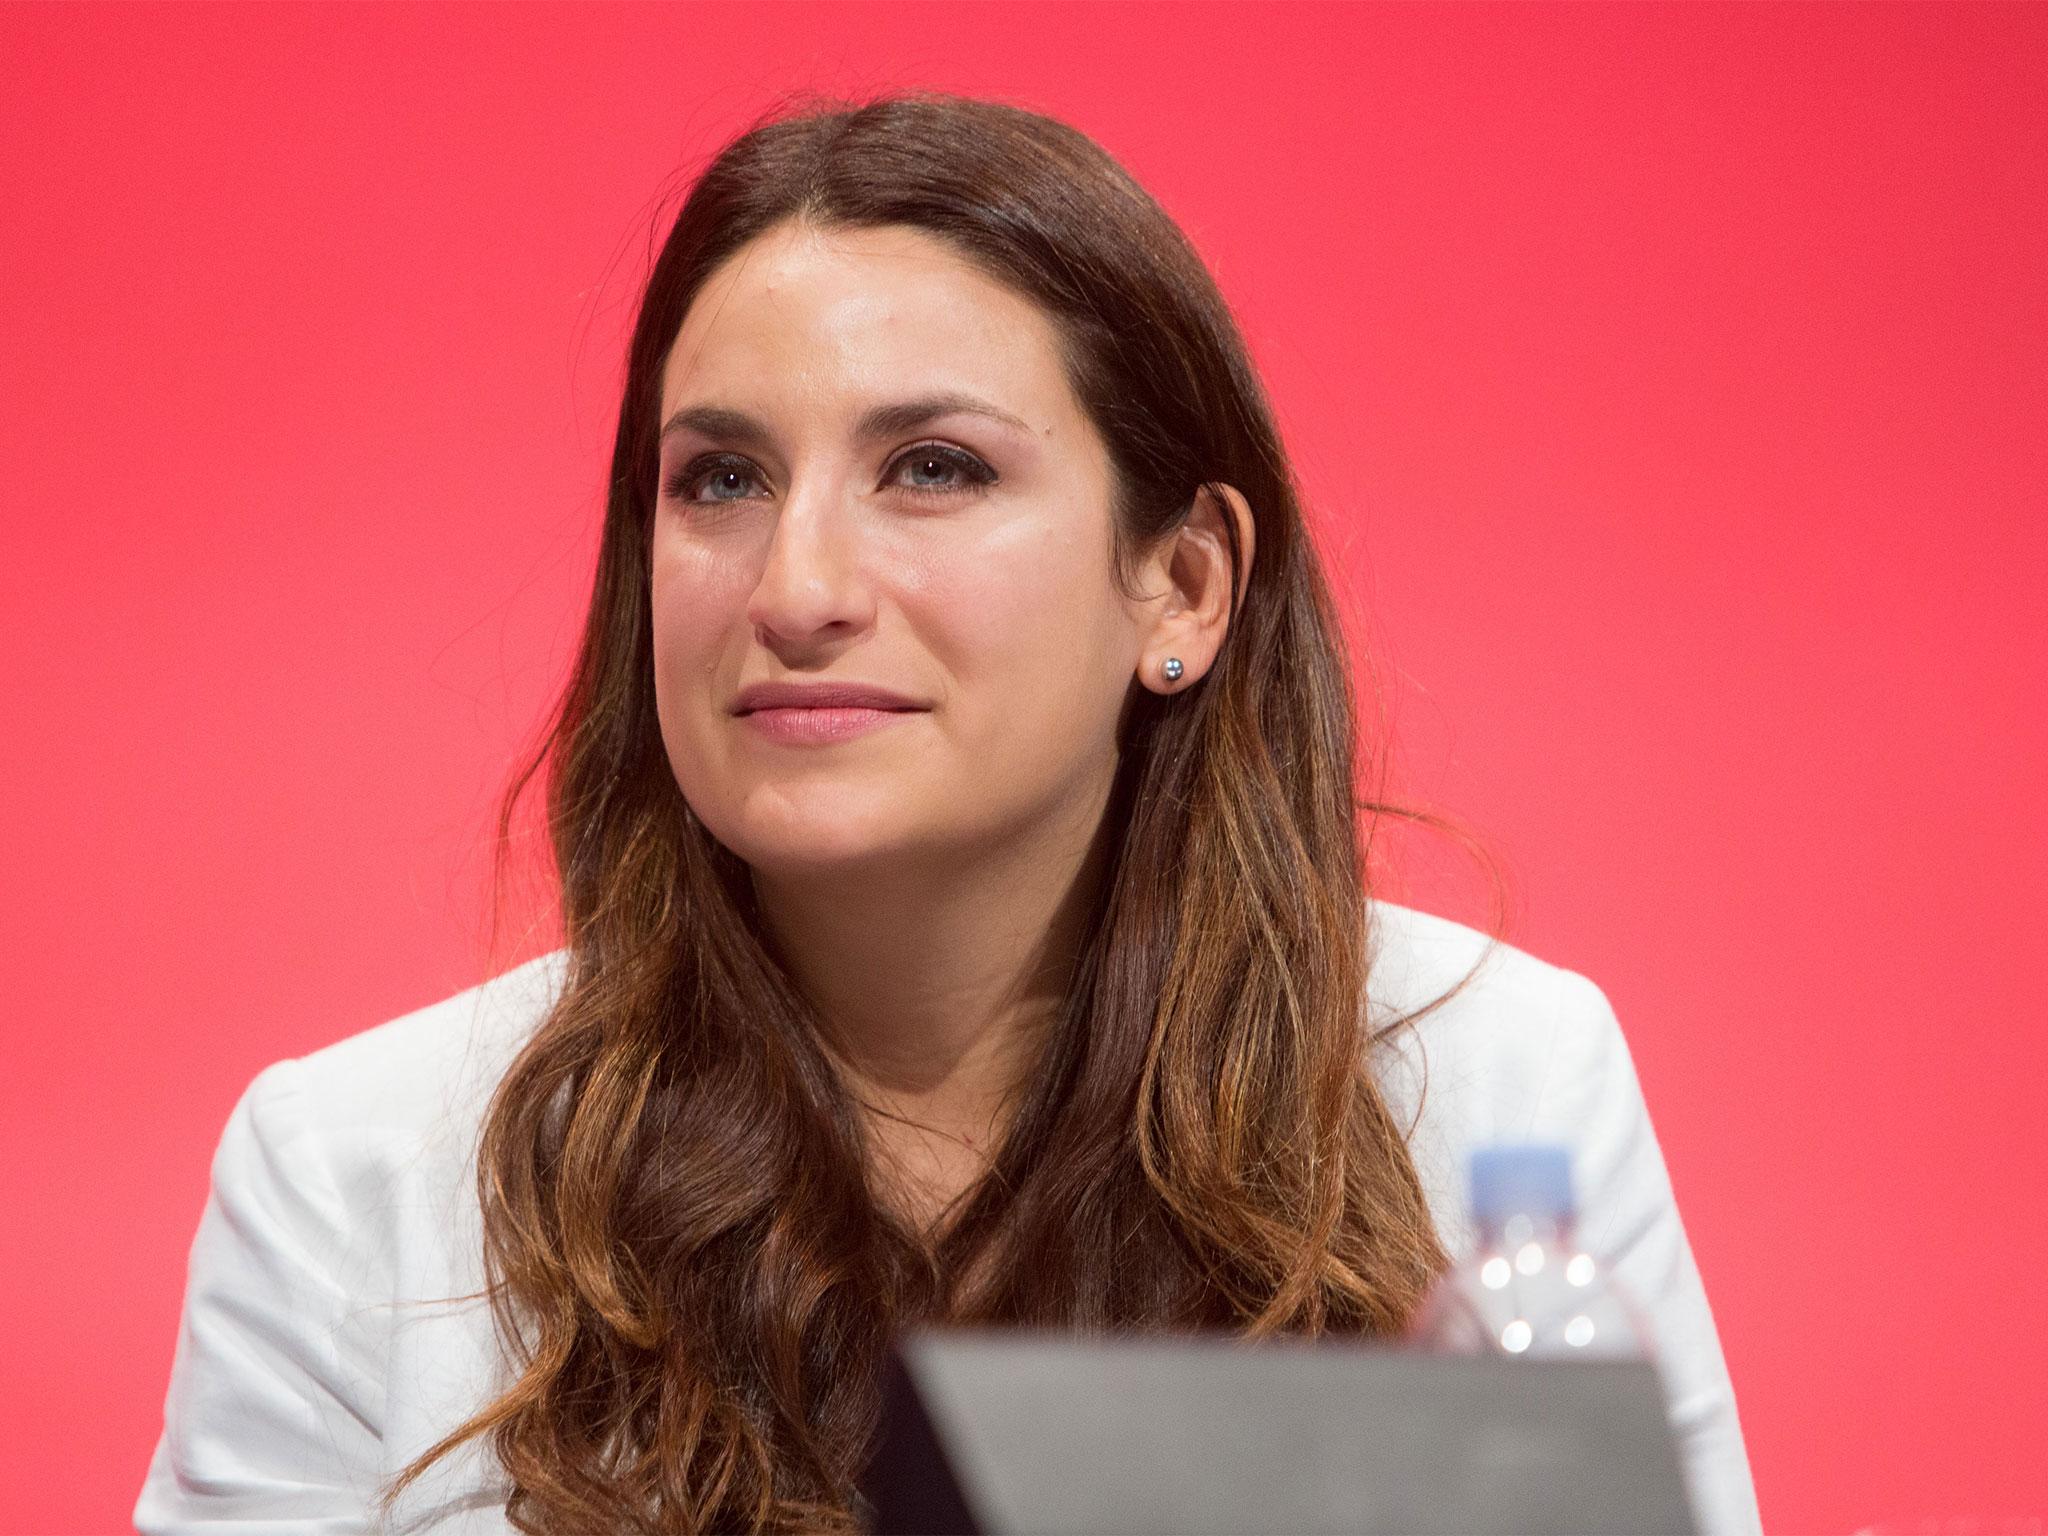 Luciana Berger has been subjected to abuse that most men will never experience